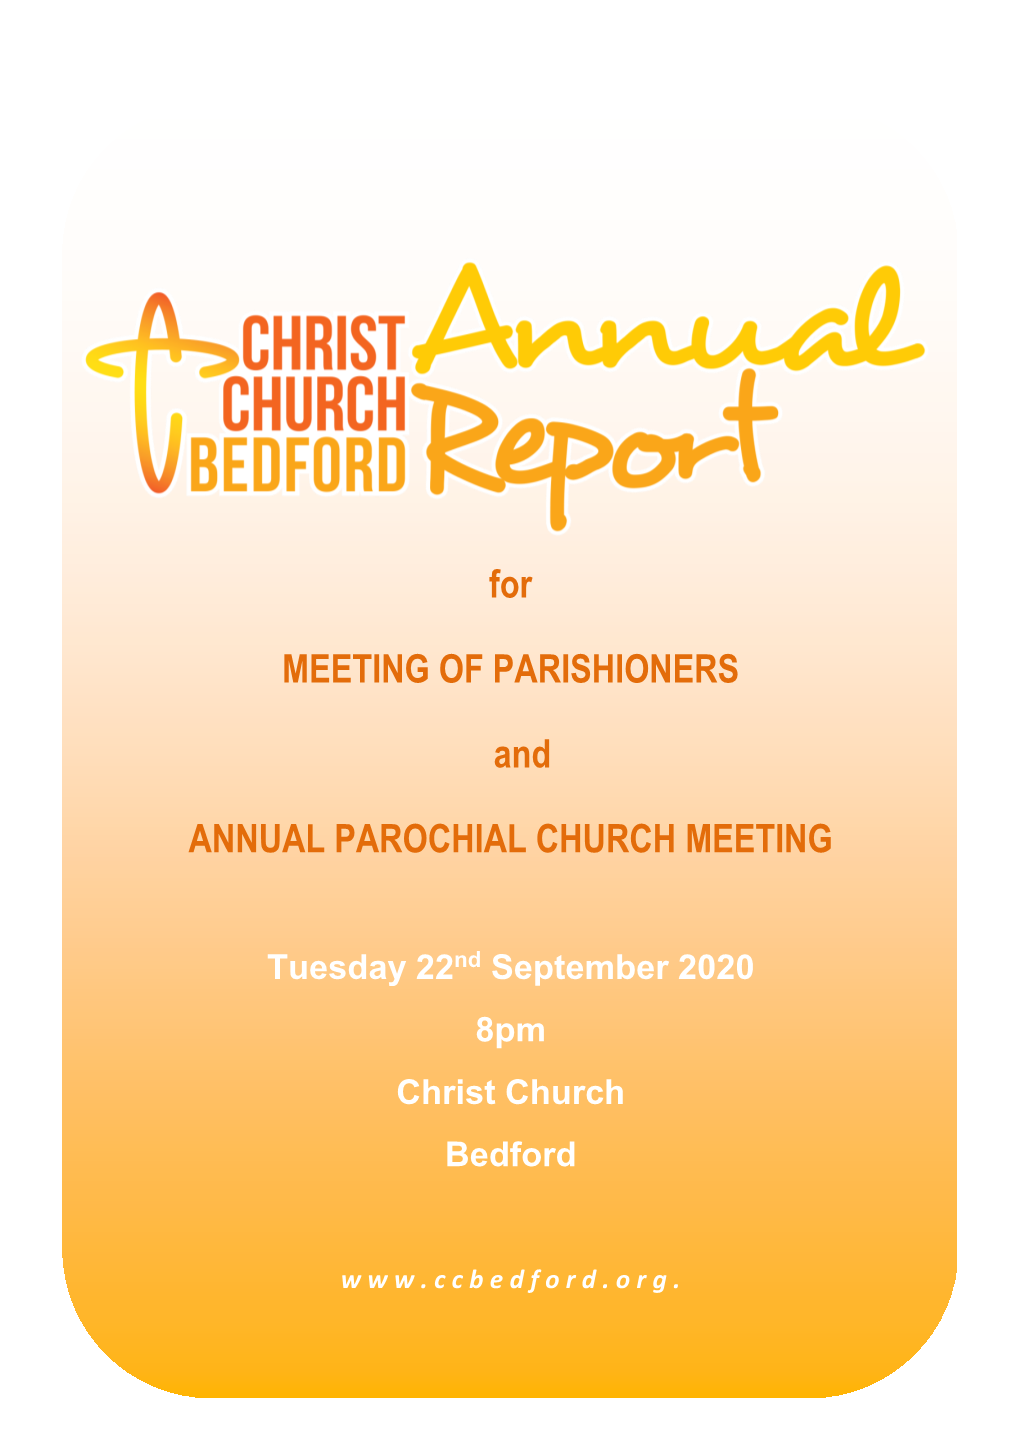 For MEETING of PARISHIONERS and ANNUAL PAROCHIAL CHURCH